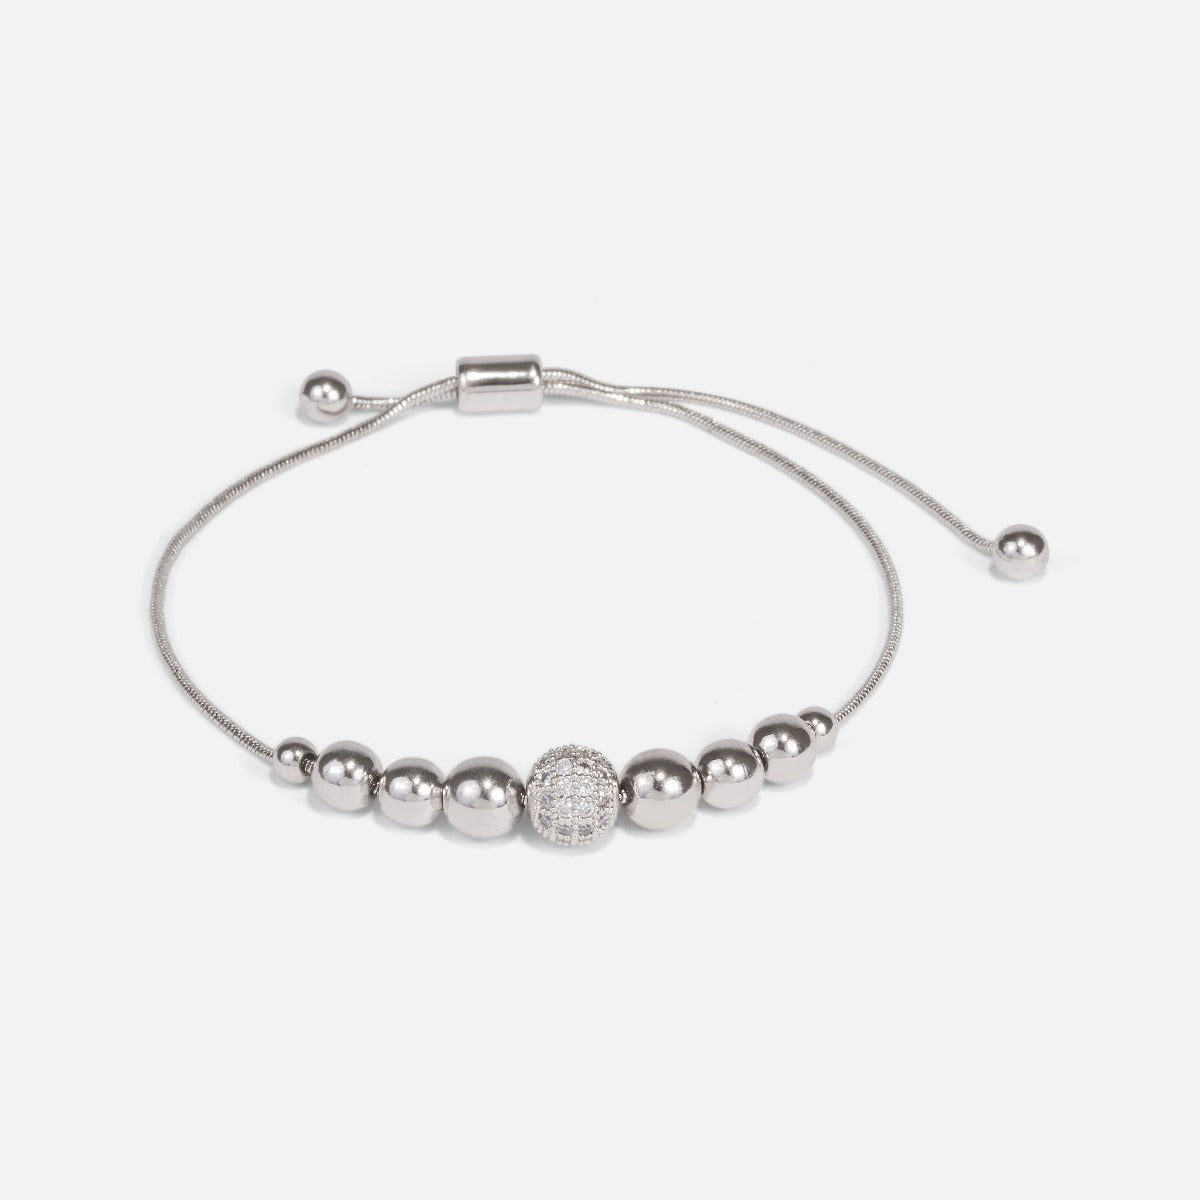 Adjustable bracelet with beads of different sizes